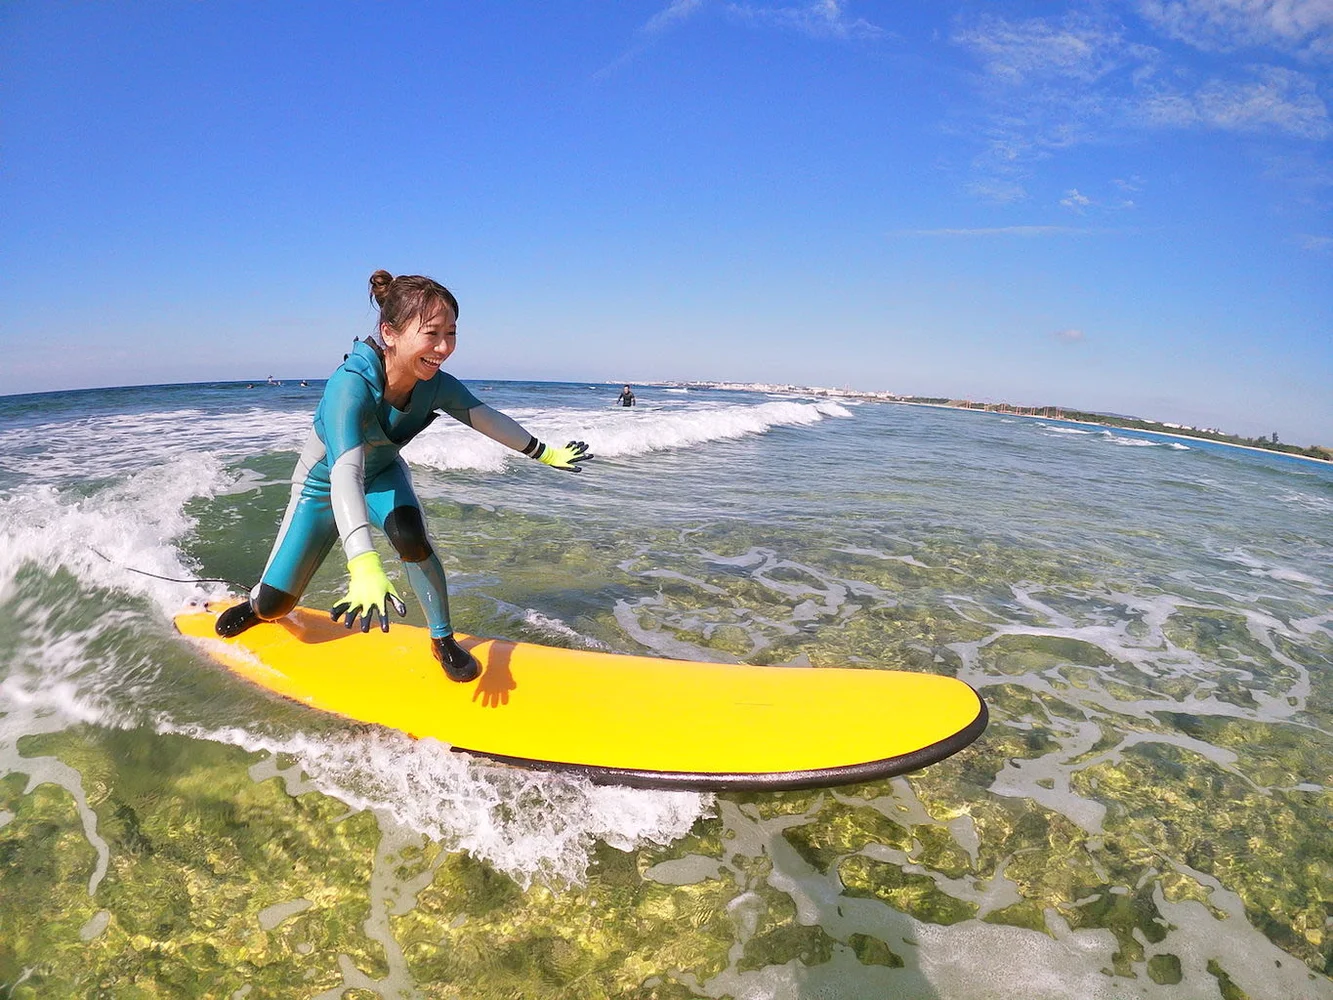 Learn to Surf in Chatan, Okinawa